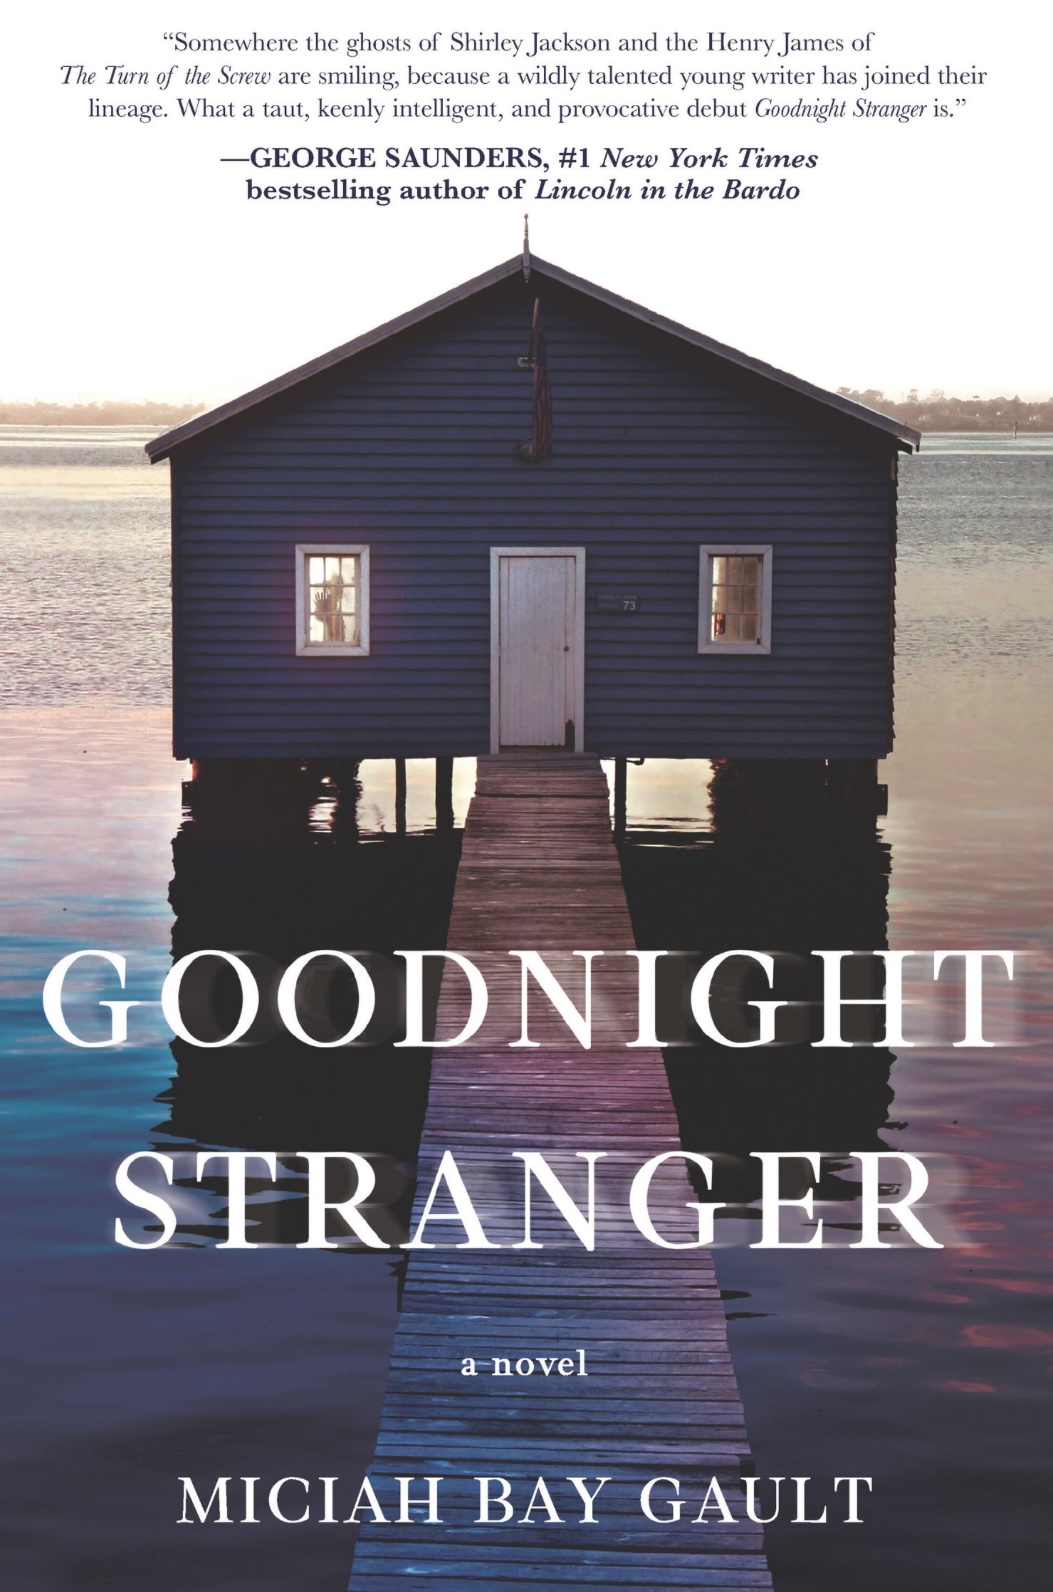 Goodnight Stranger by Miciah Bay Gault book cover